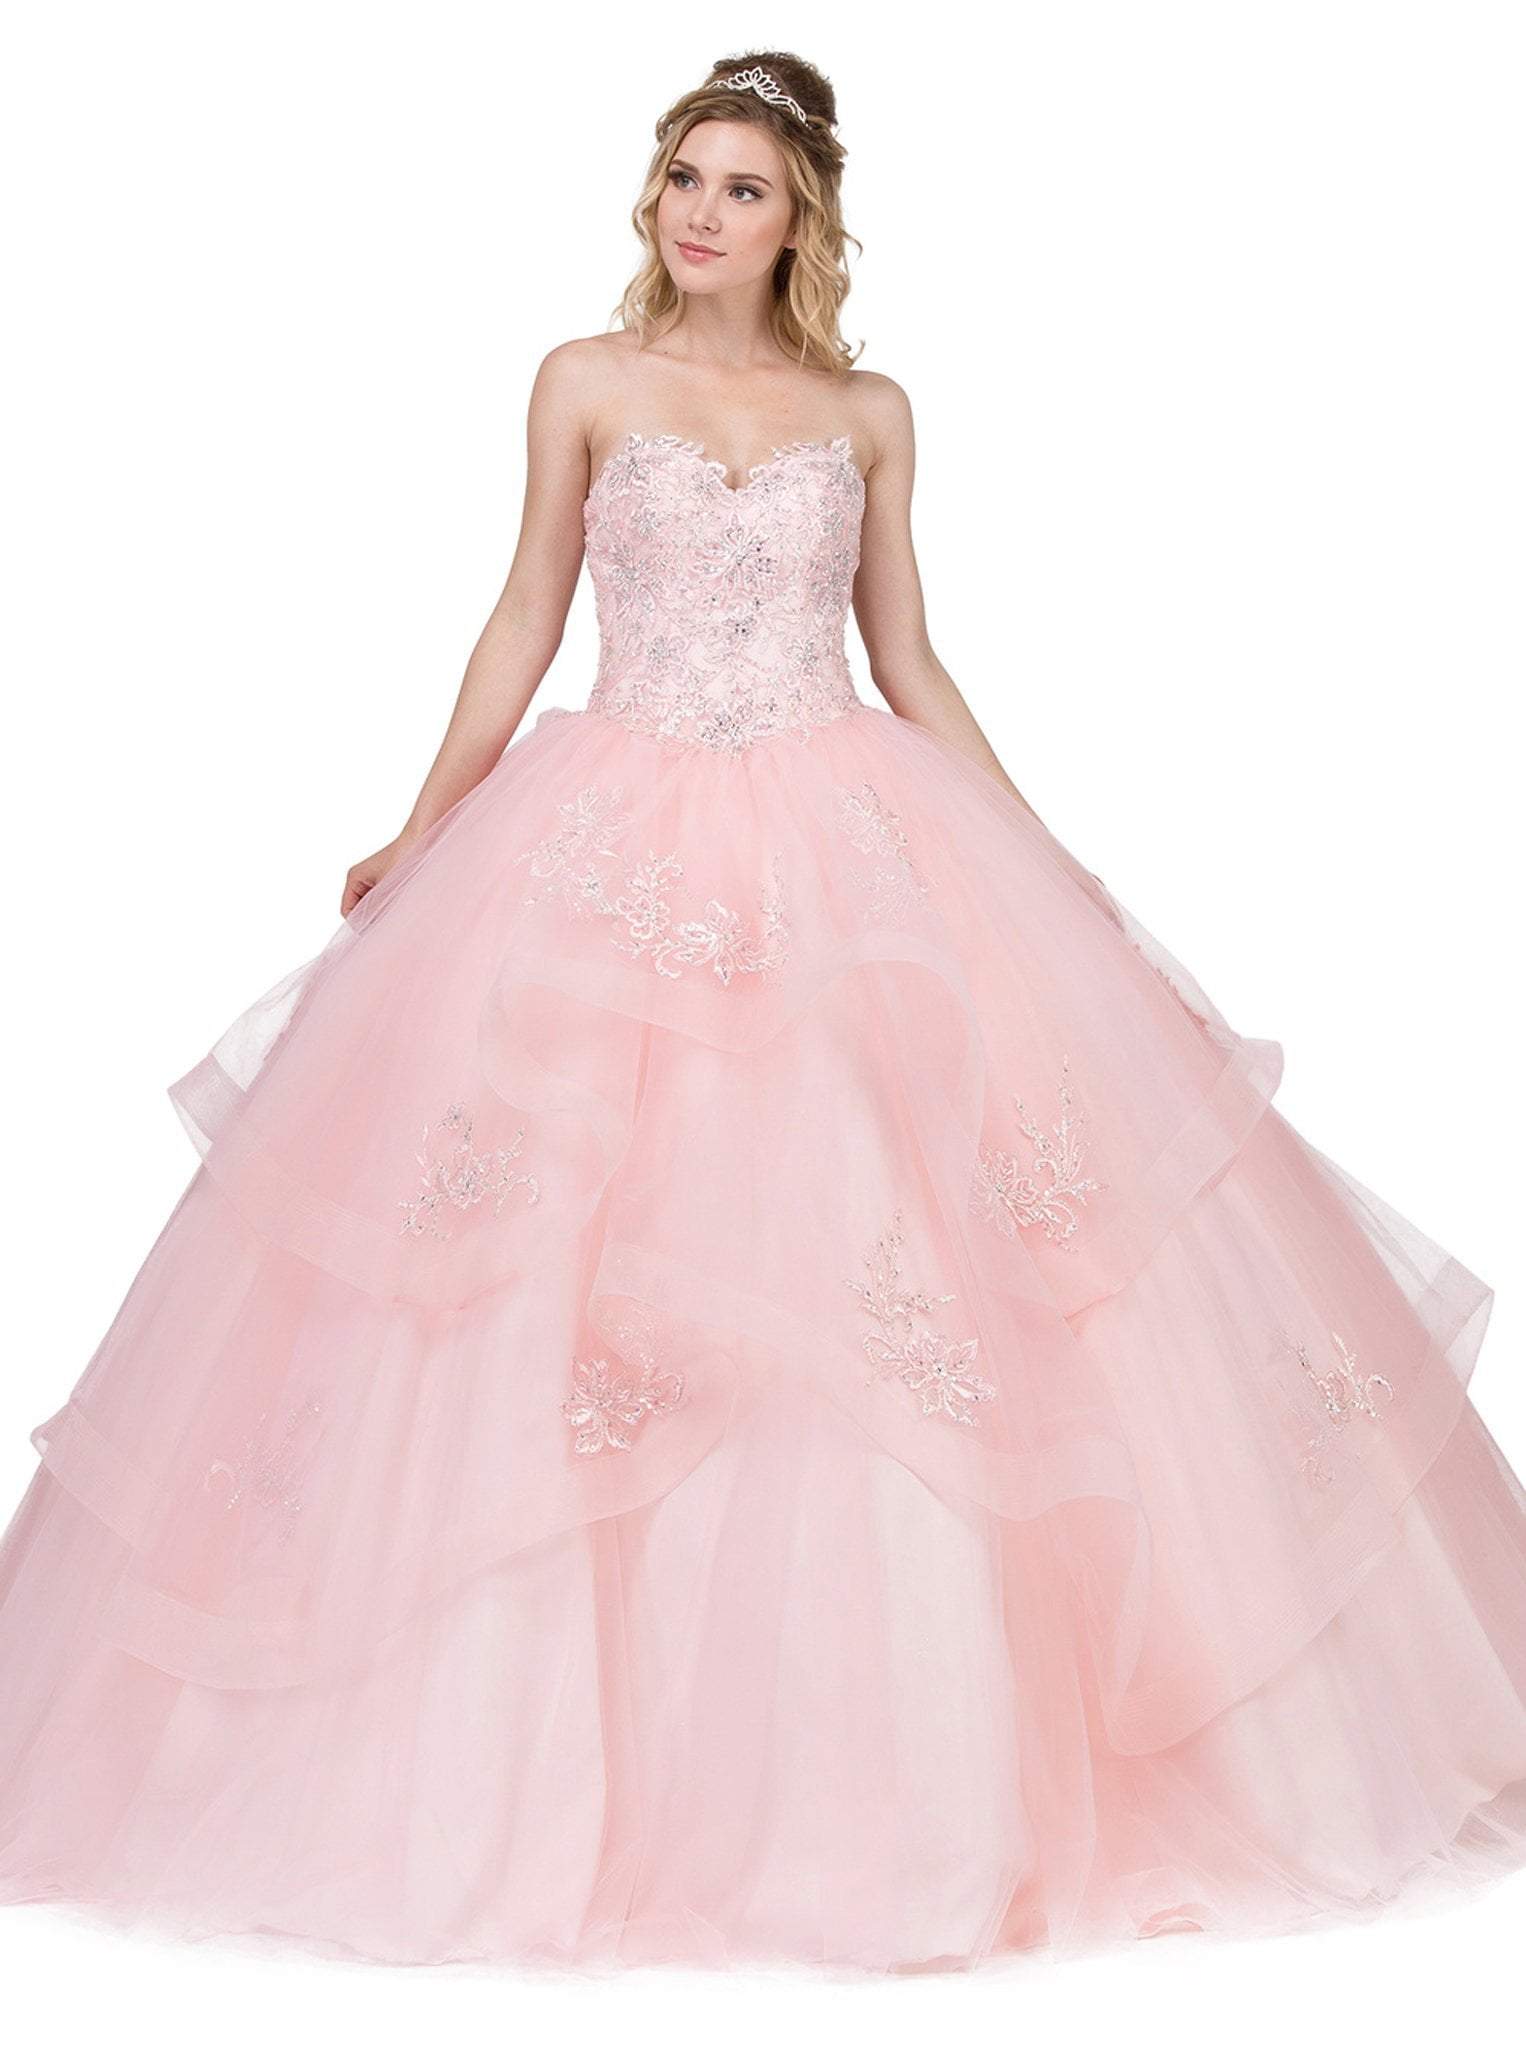 Dancing Queen - 1328 Strapless Embellished Sweetheart Ballgown